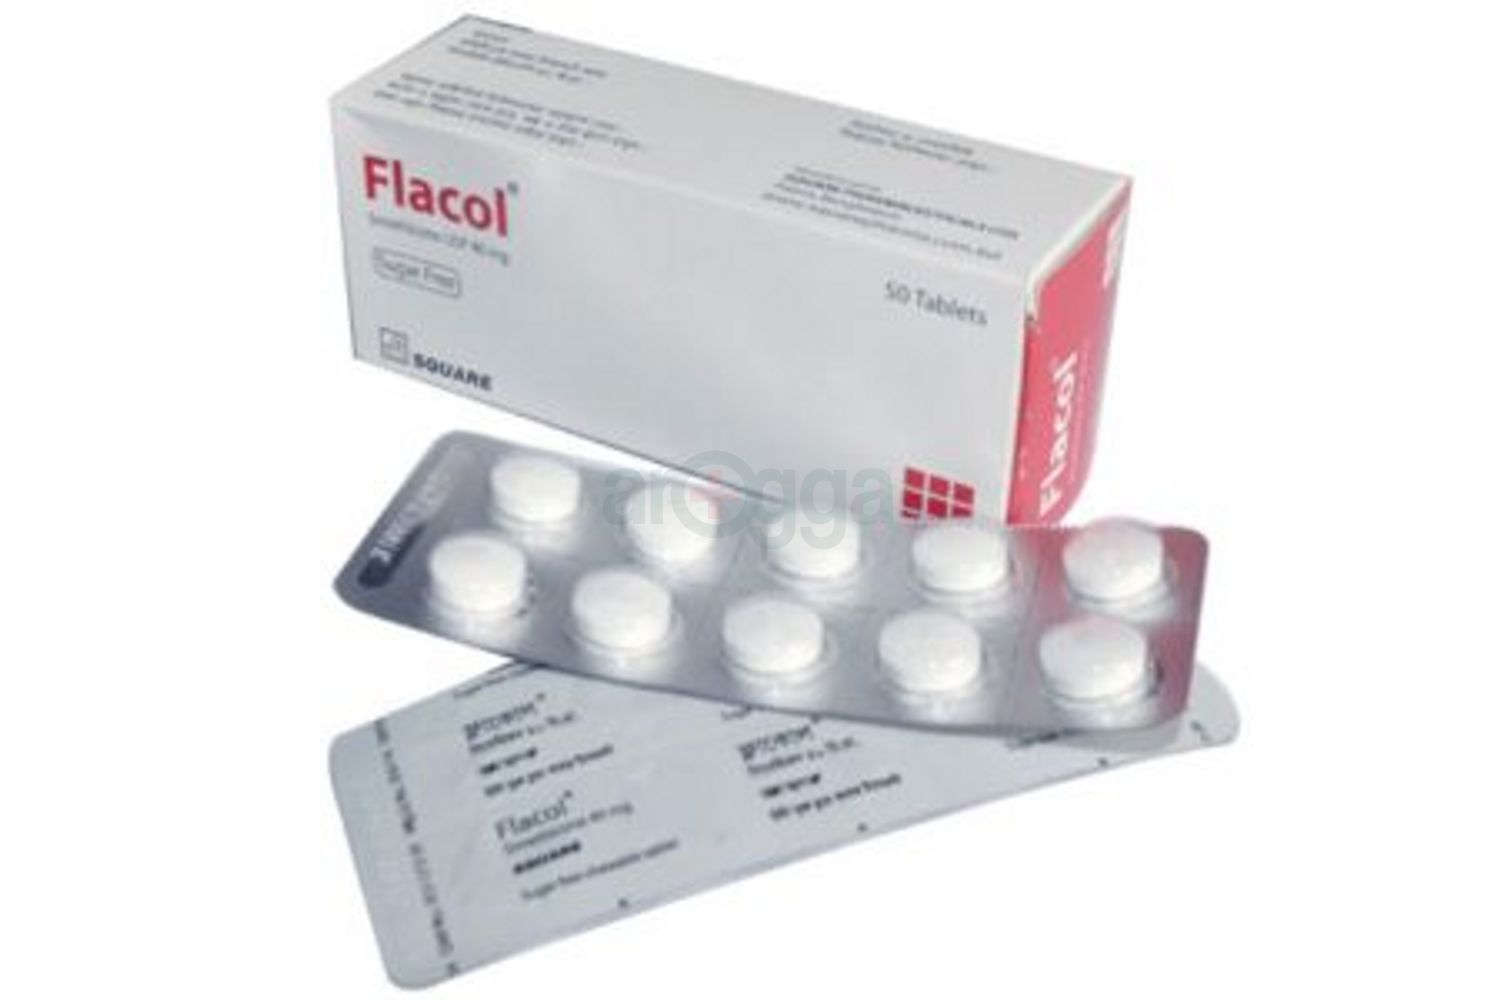 Flacol 40 Chewable Tablet